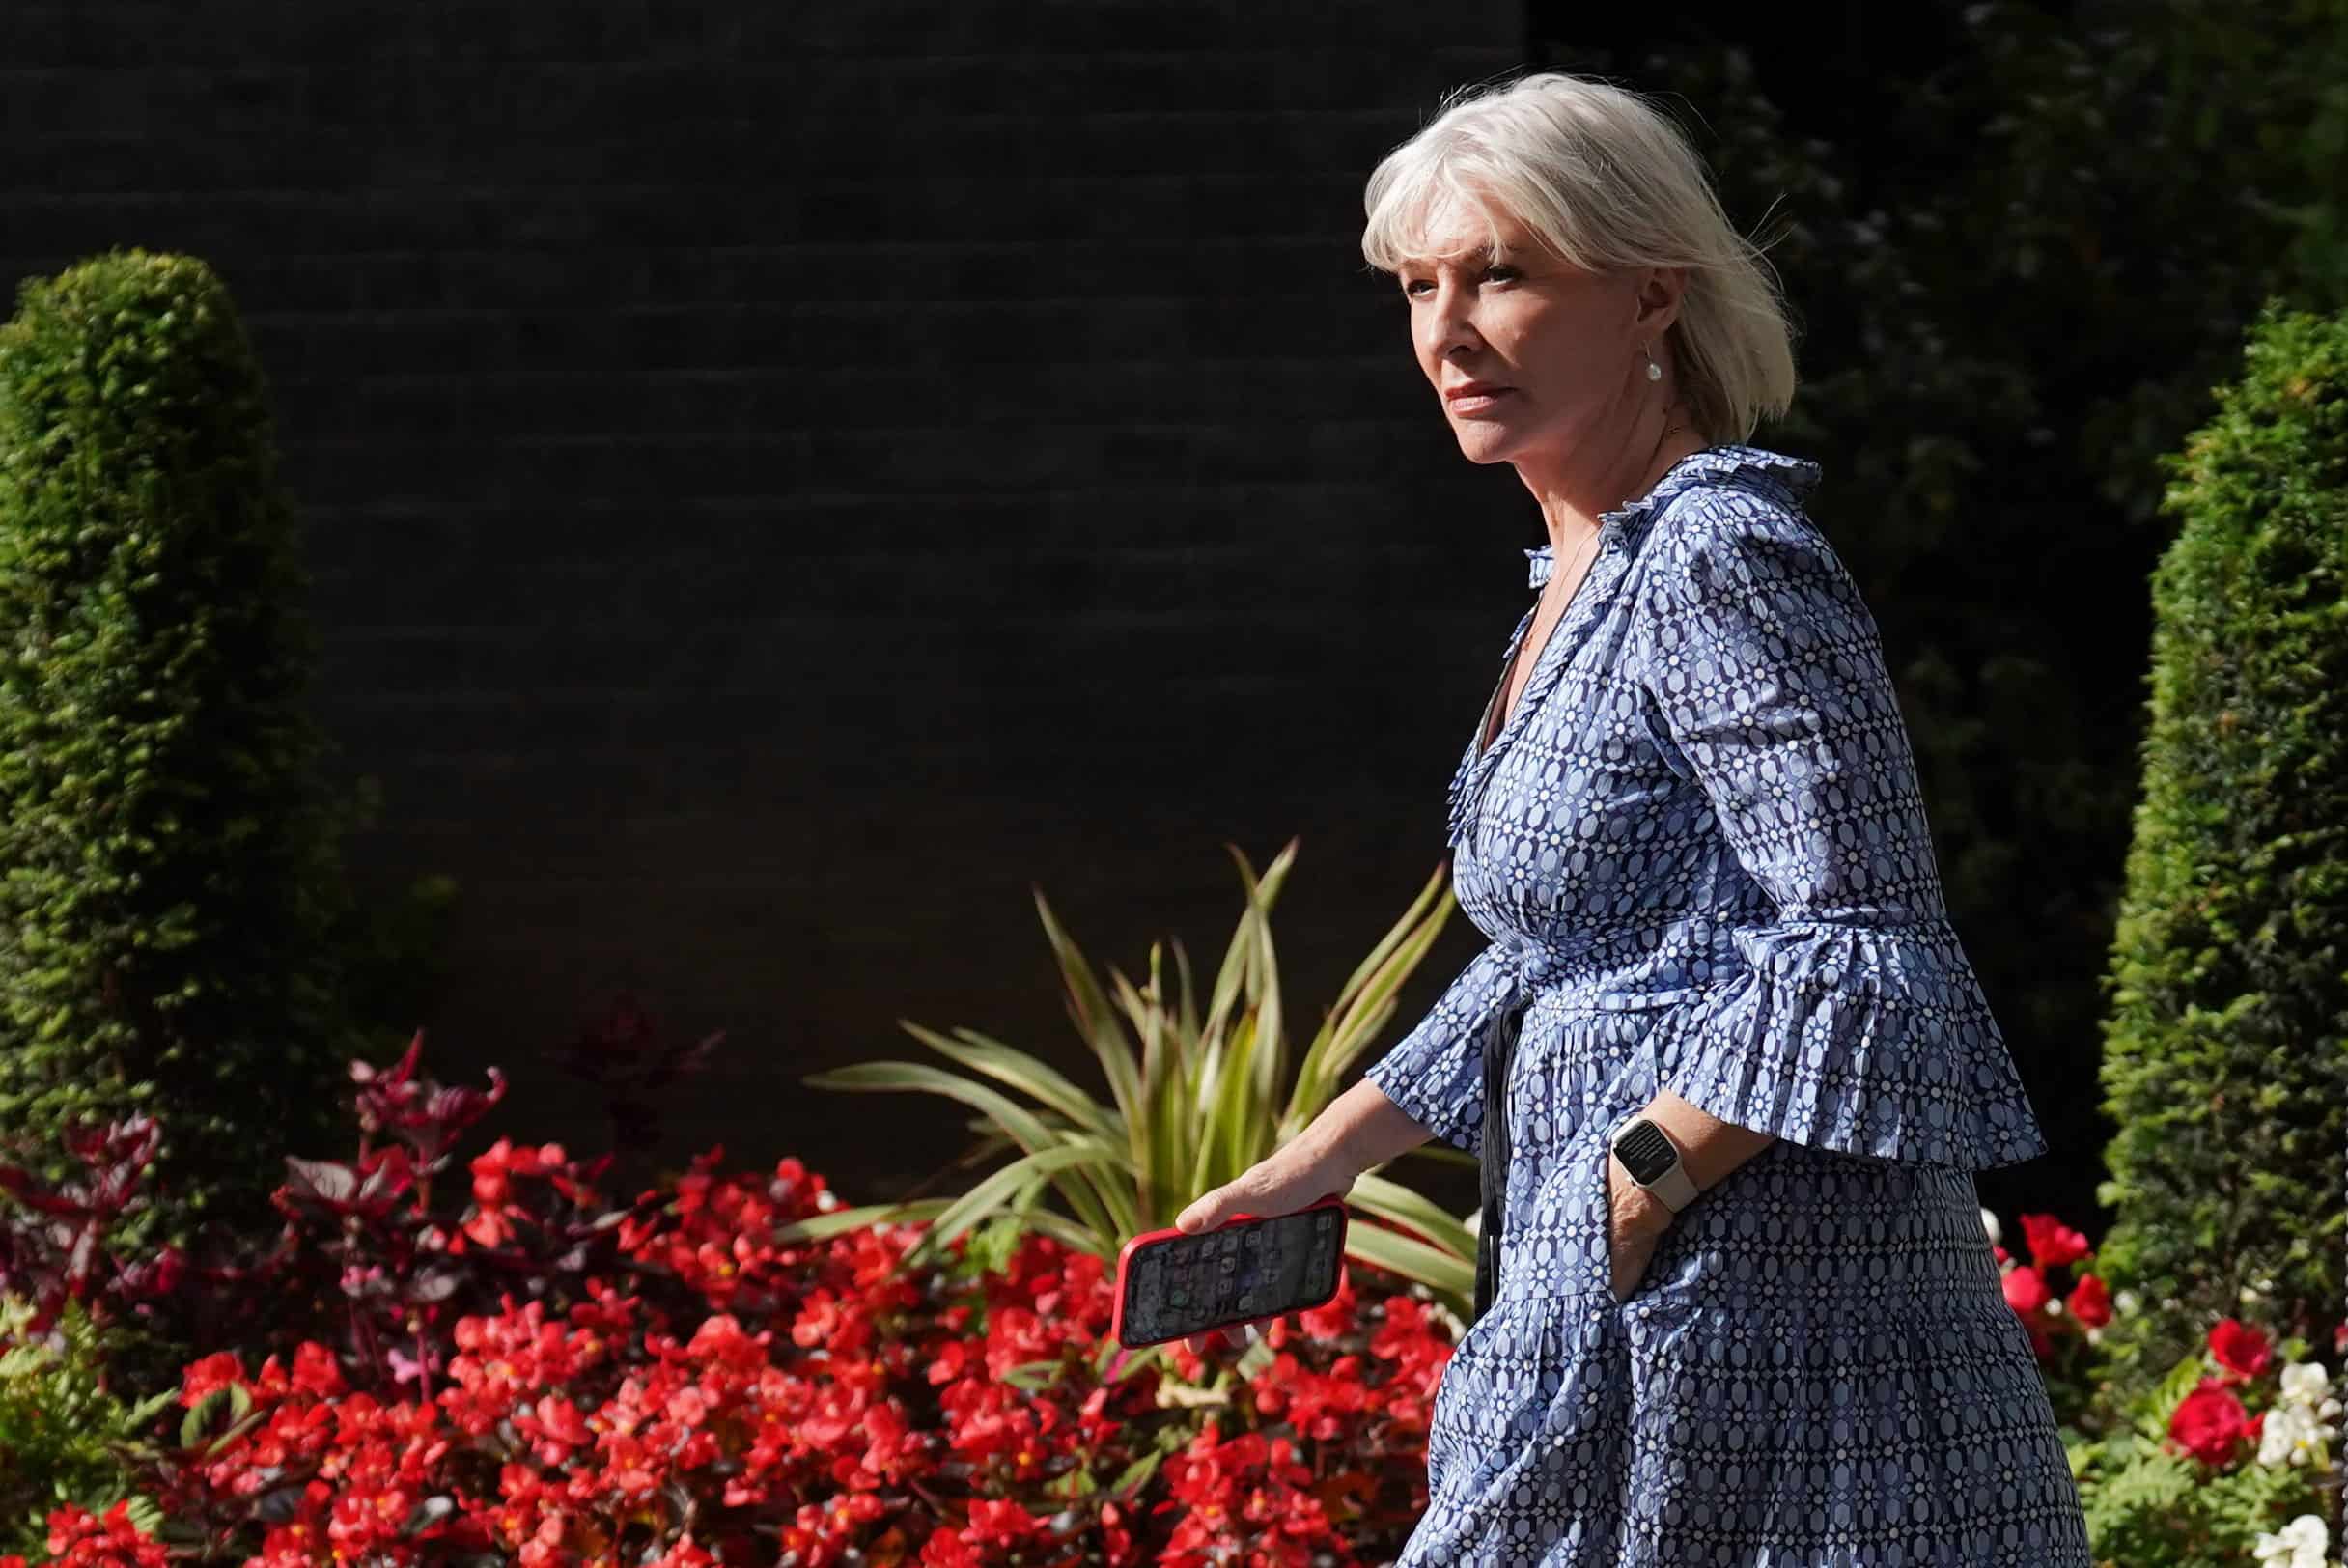 Lib Dems to table Bill for Nadine Dorries’ suspension as an MP